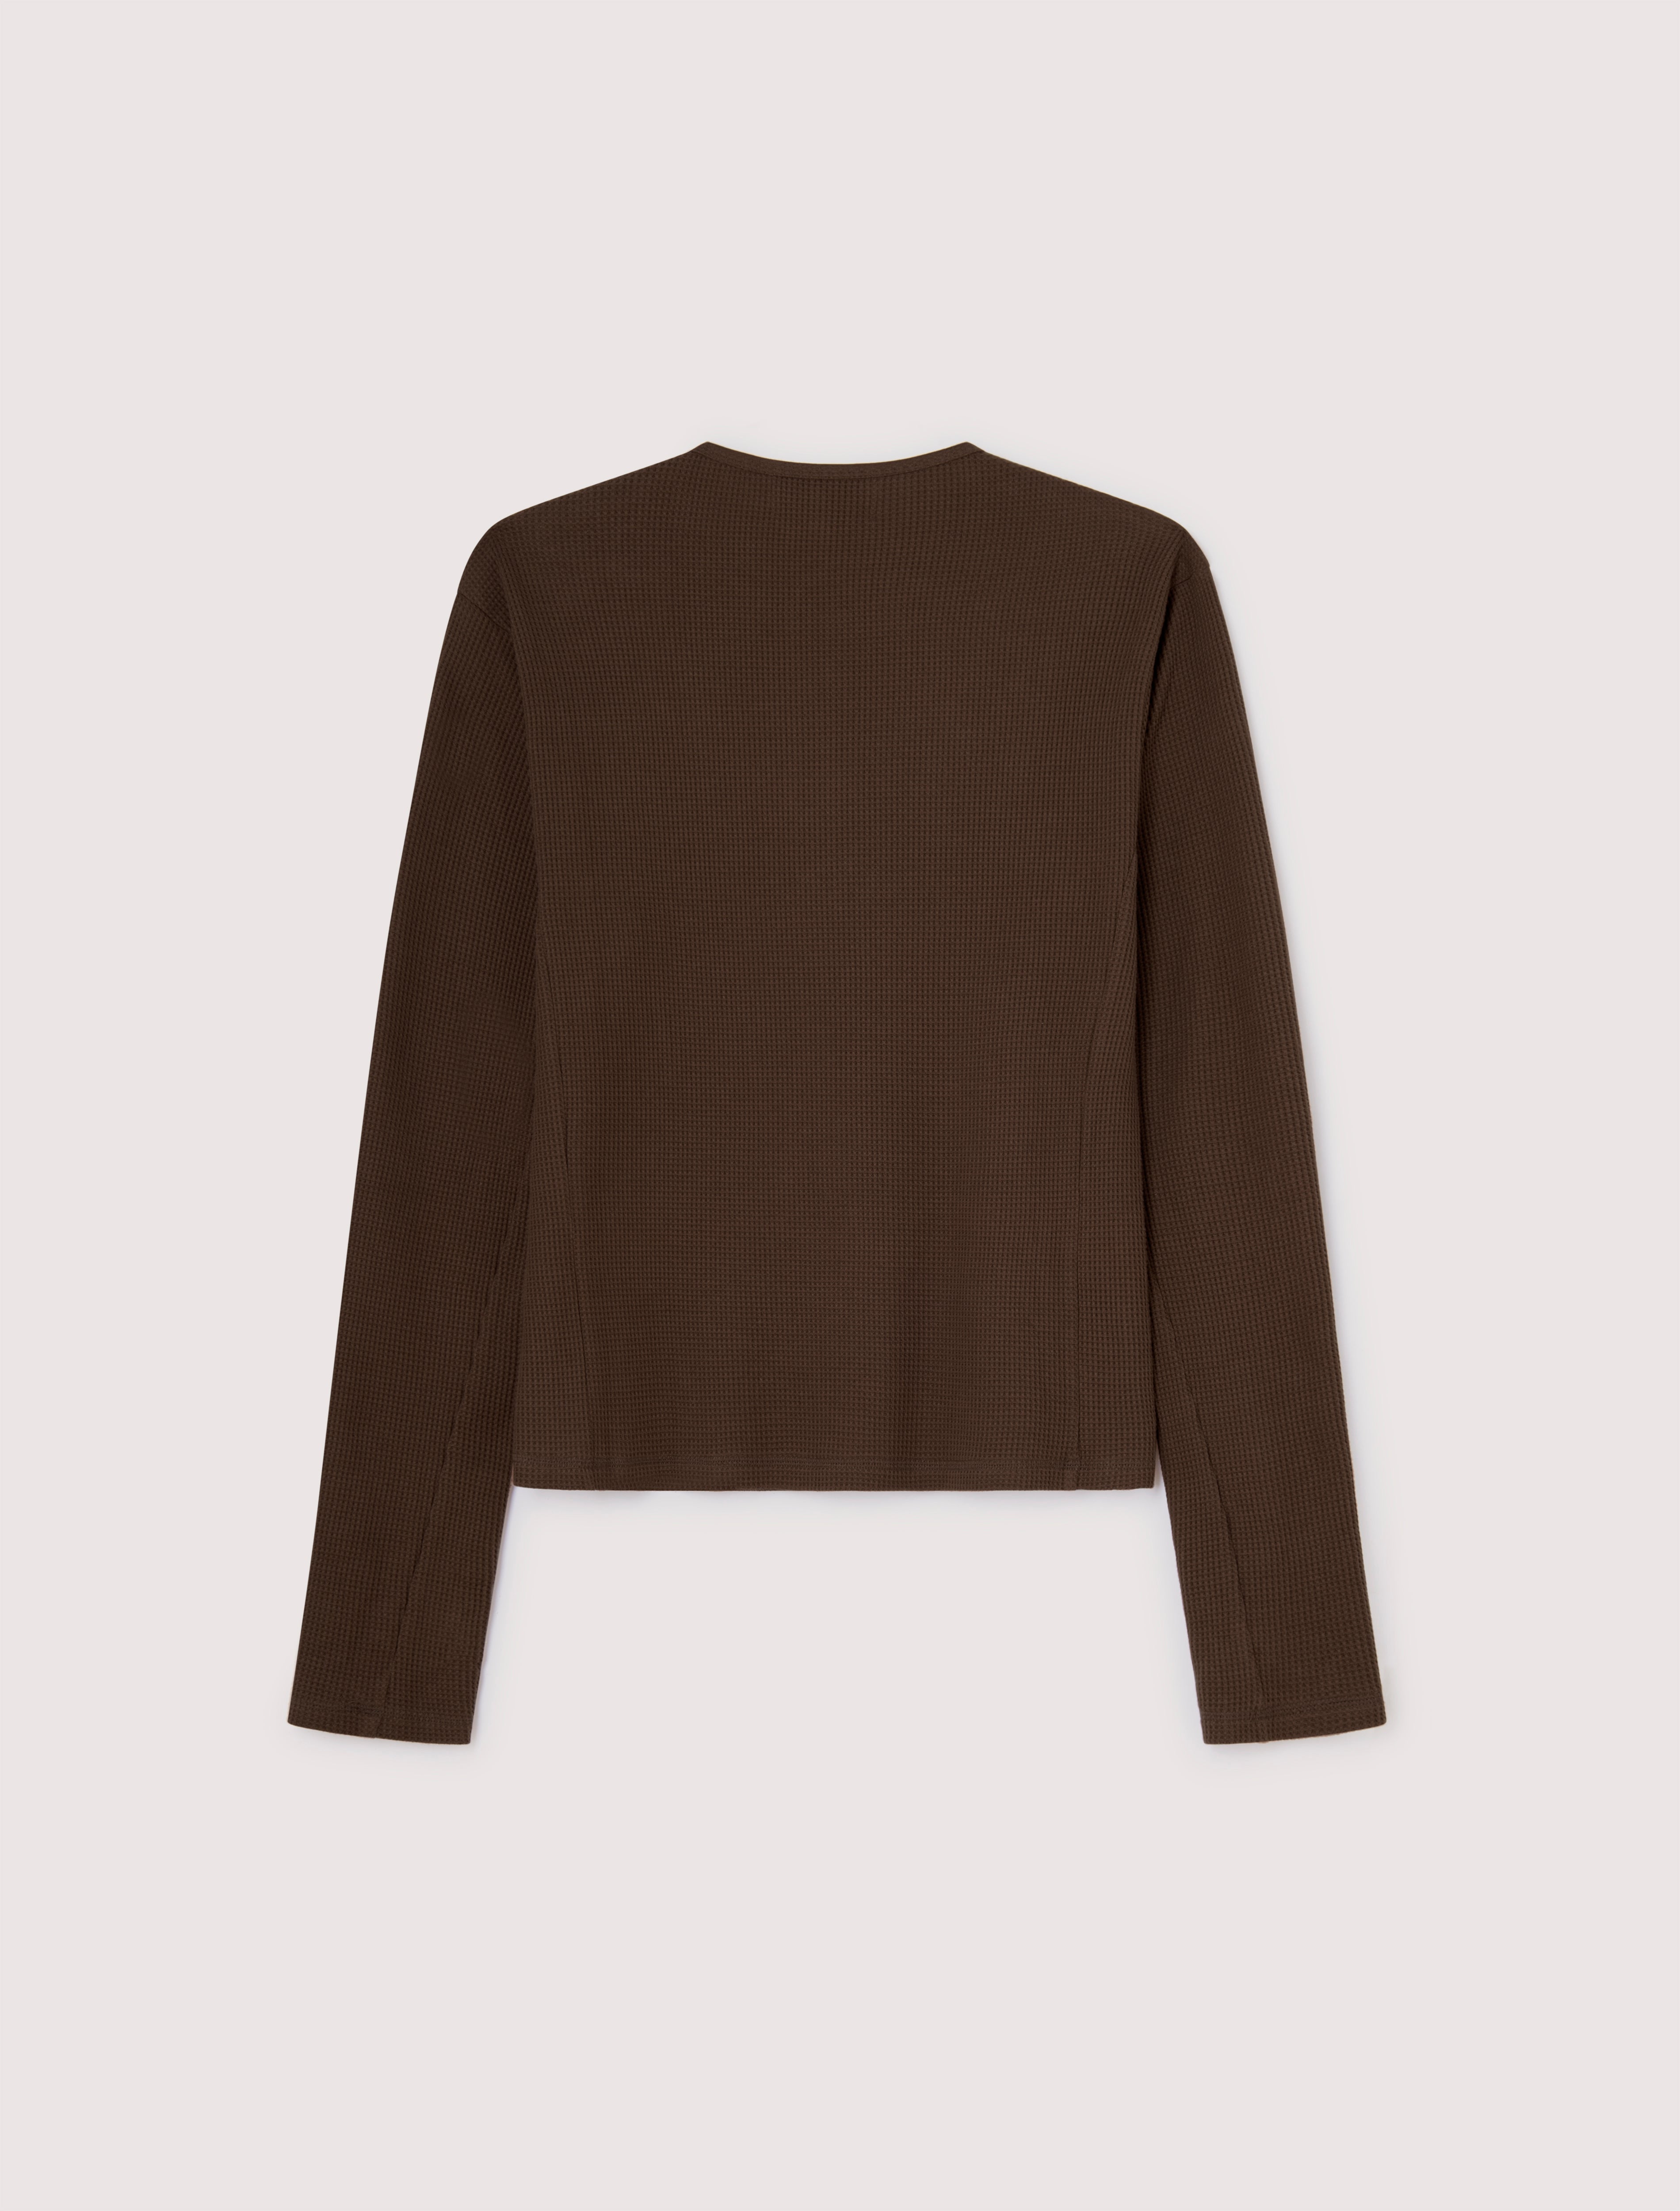 CARRER_LIS HENLEY LONG SLEEVE IN CLASSIC BROWN